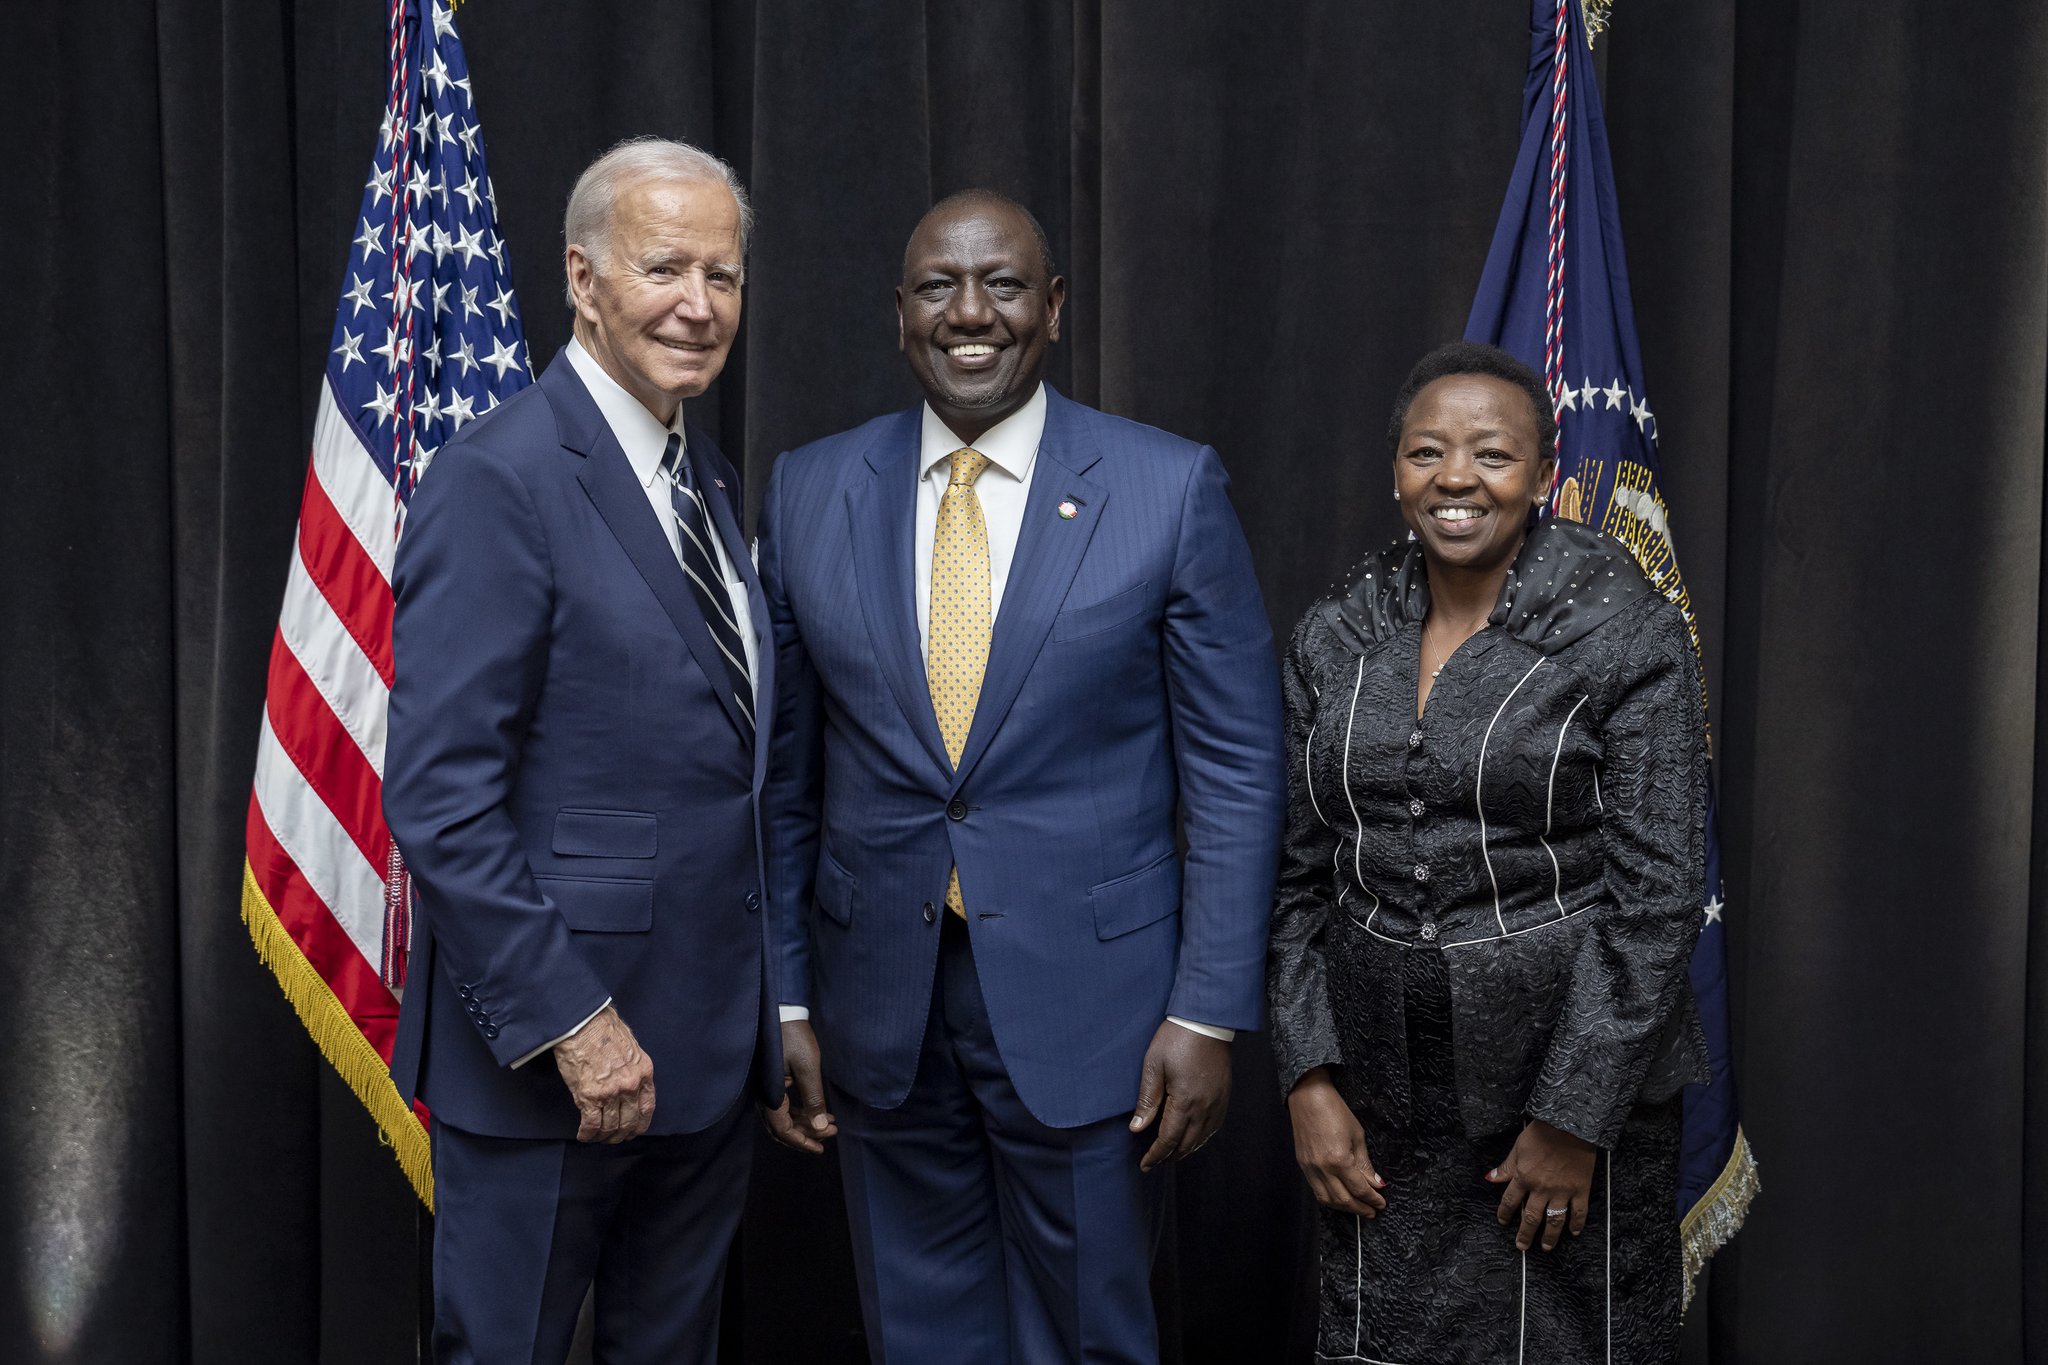 President William Ruto and First Lady Rachel Ruto at a reception hosted by US President Joe Biden.